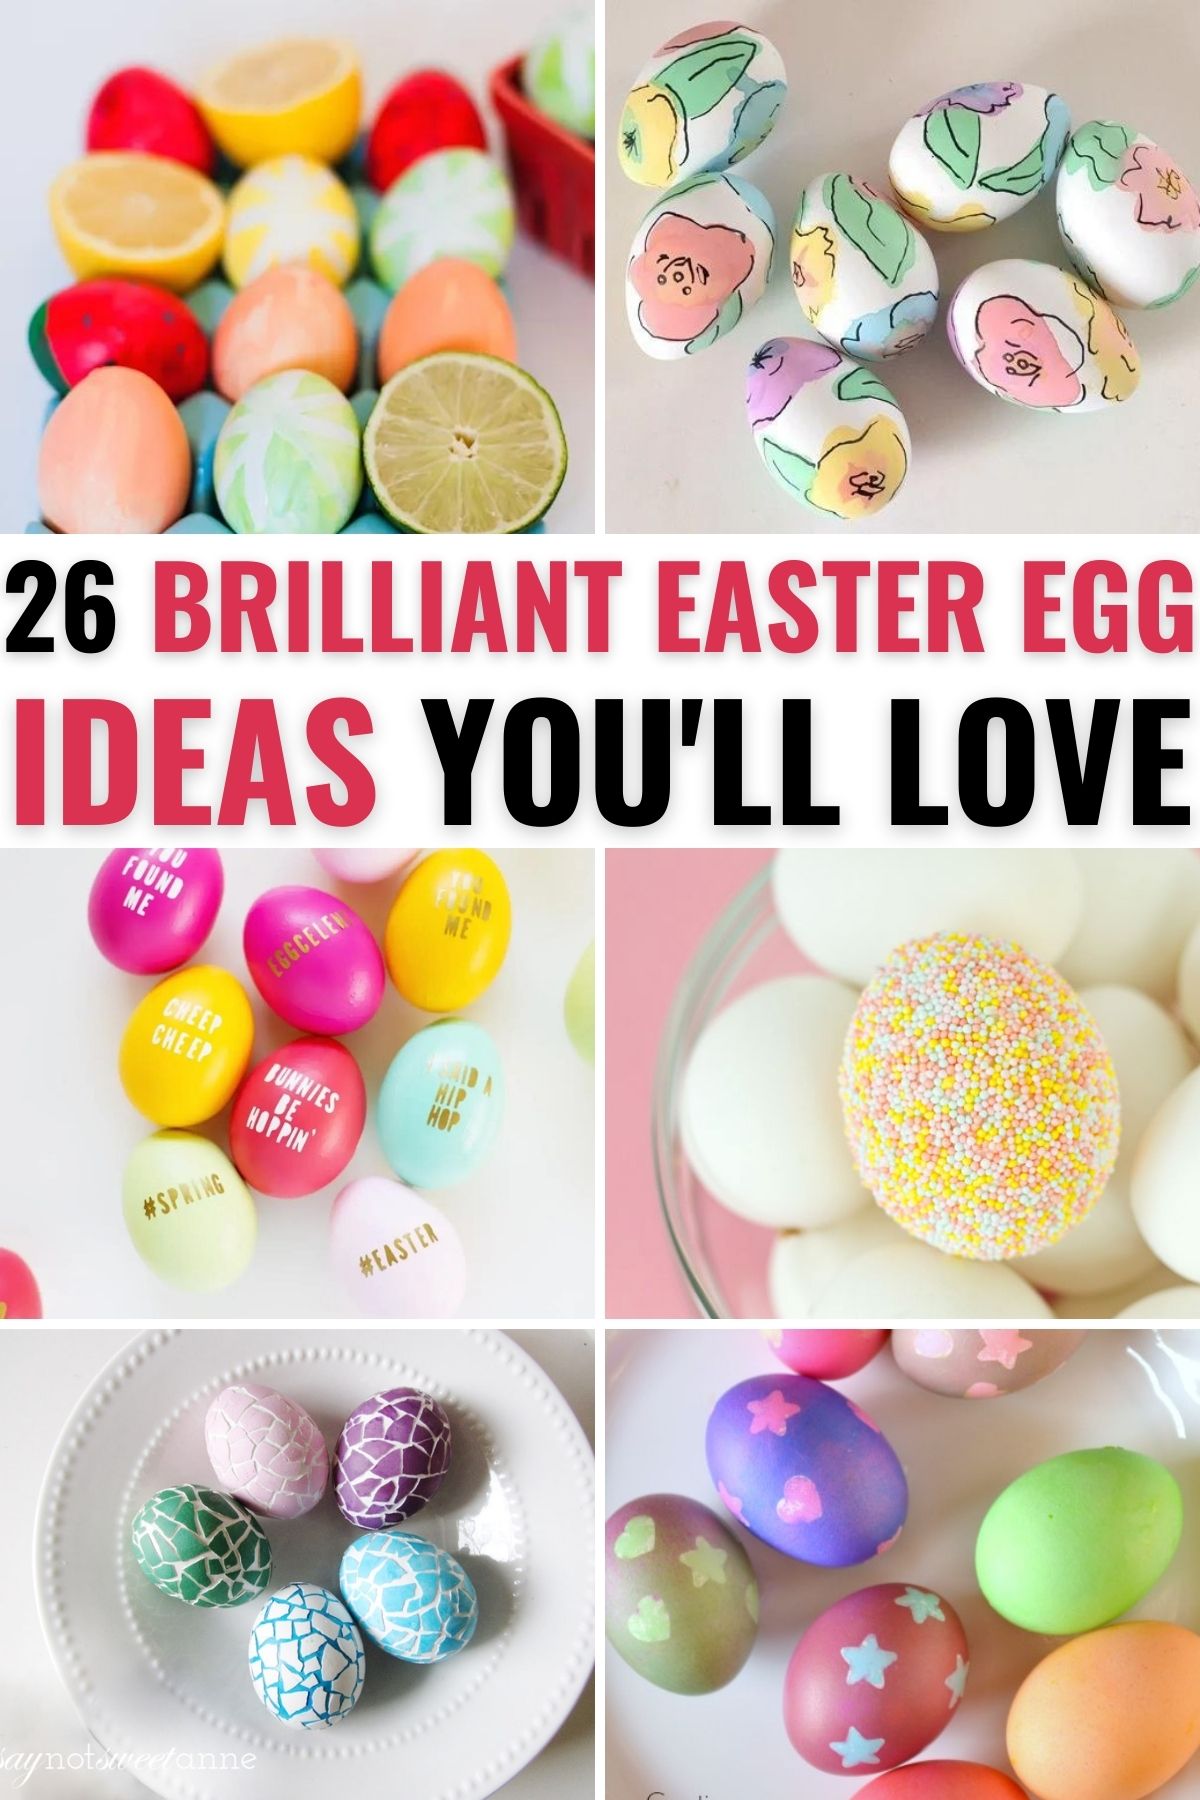 A collection of unique ways to decorate eggs for Easter.